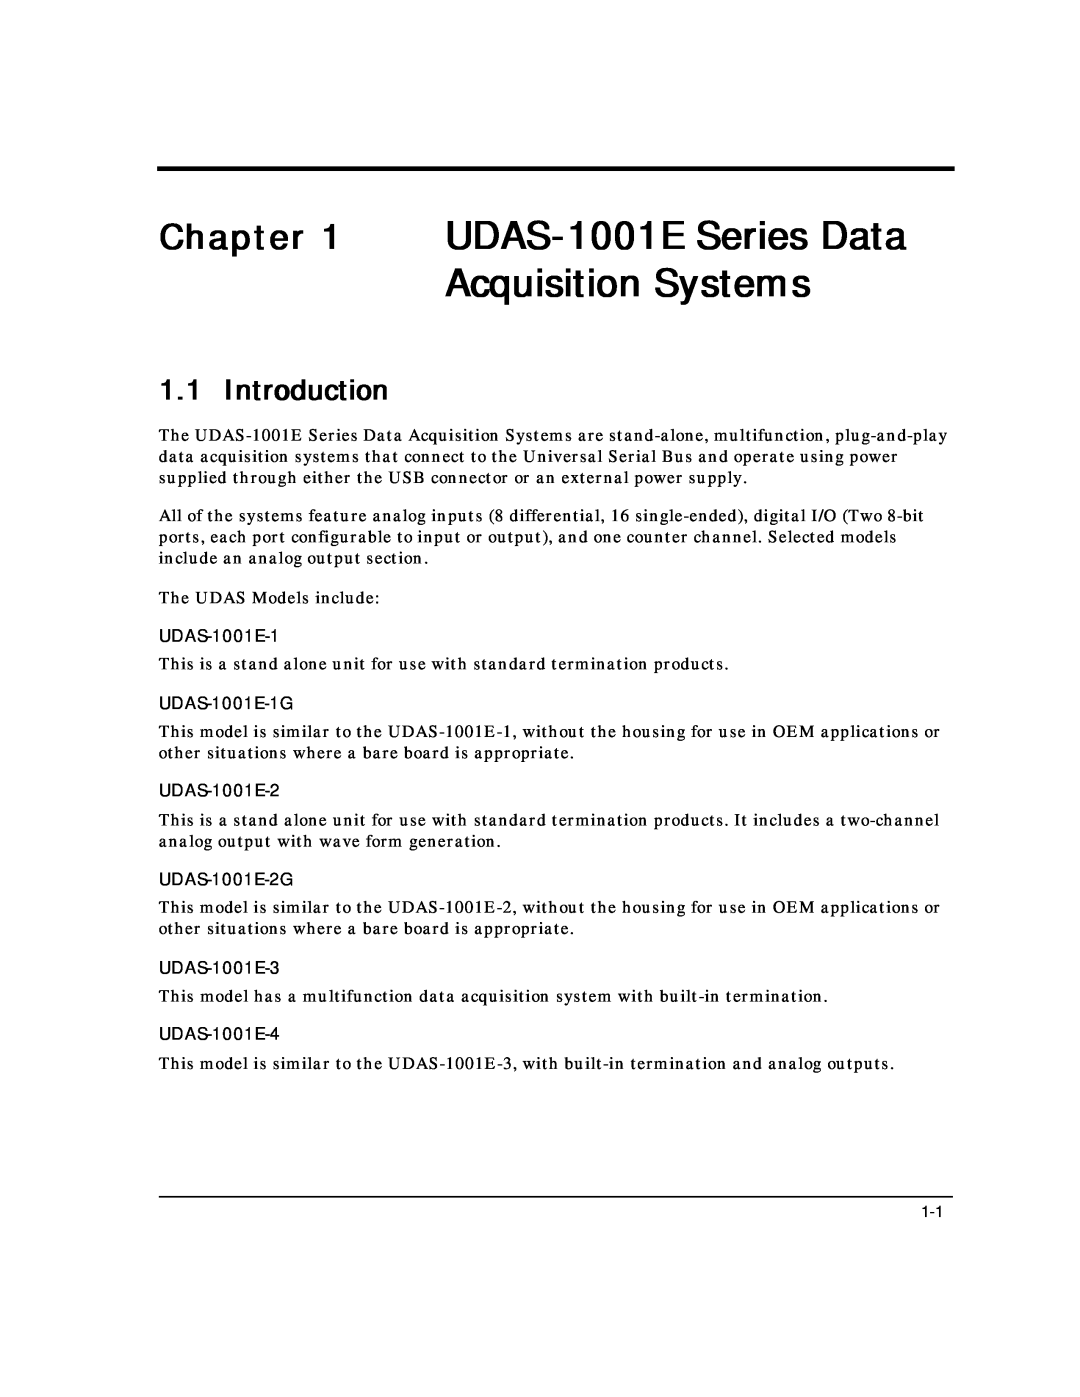 Intelligent Motion Systems user manual UDAS-1001E Series Data Acquisition Systems, Chapter, Introduction, UDAS-1001E-1 